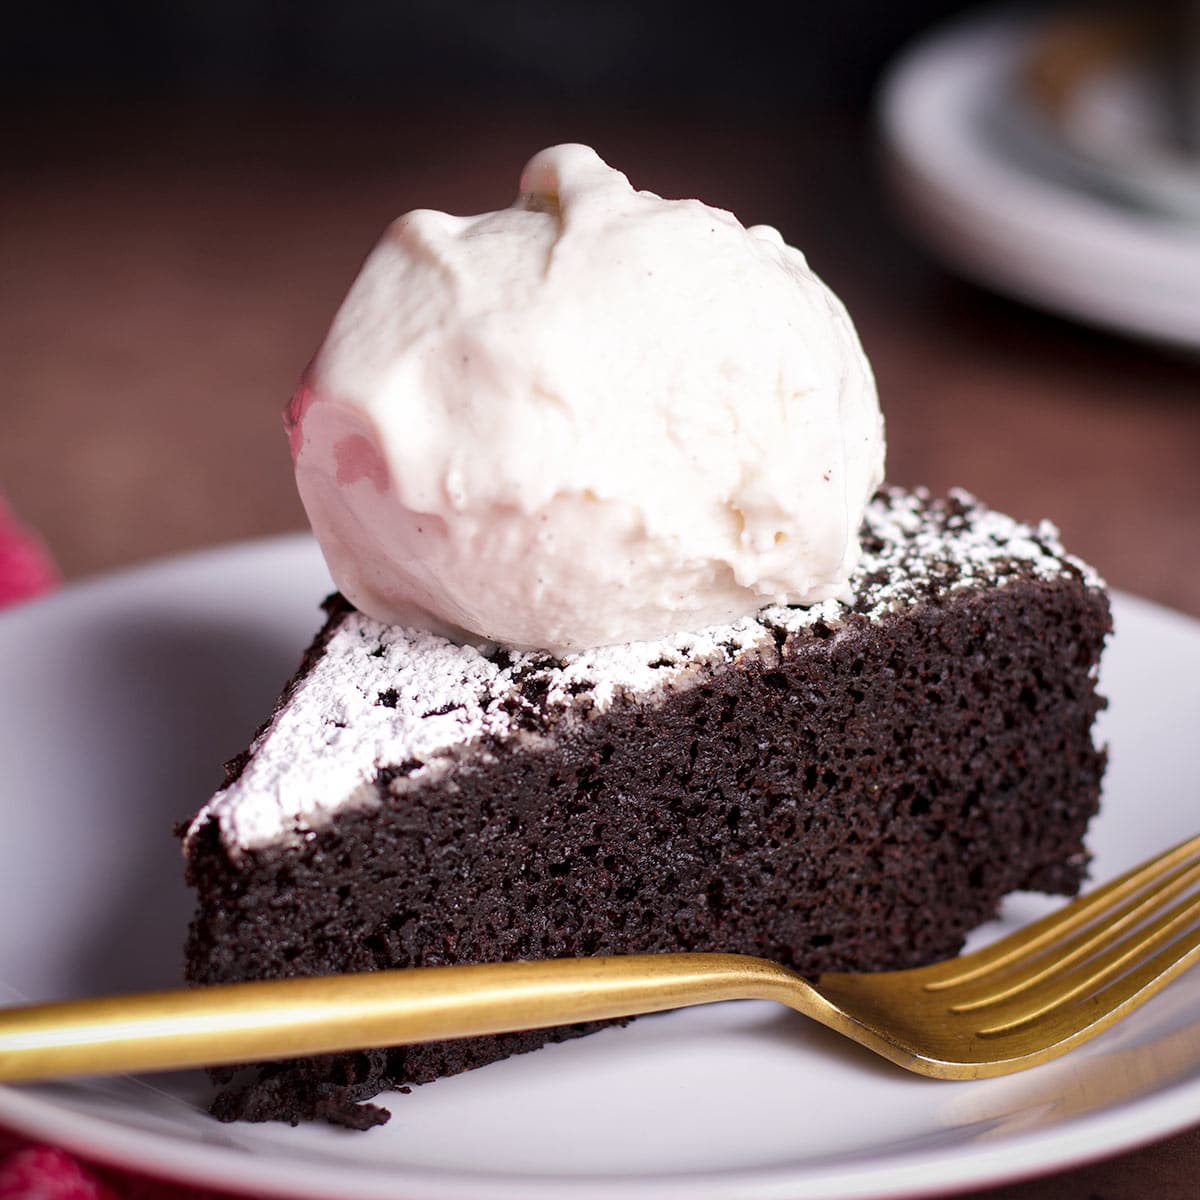 A slice of Dutch oven chocolate cake topped with a scoop of vanilla ice cream.